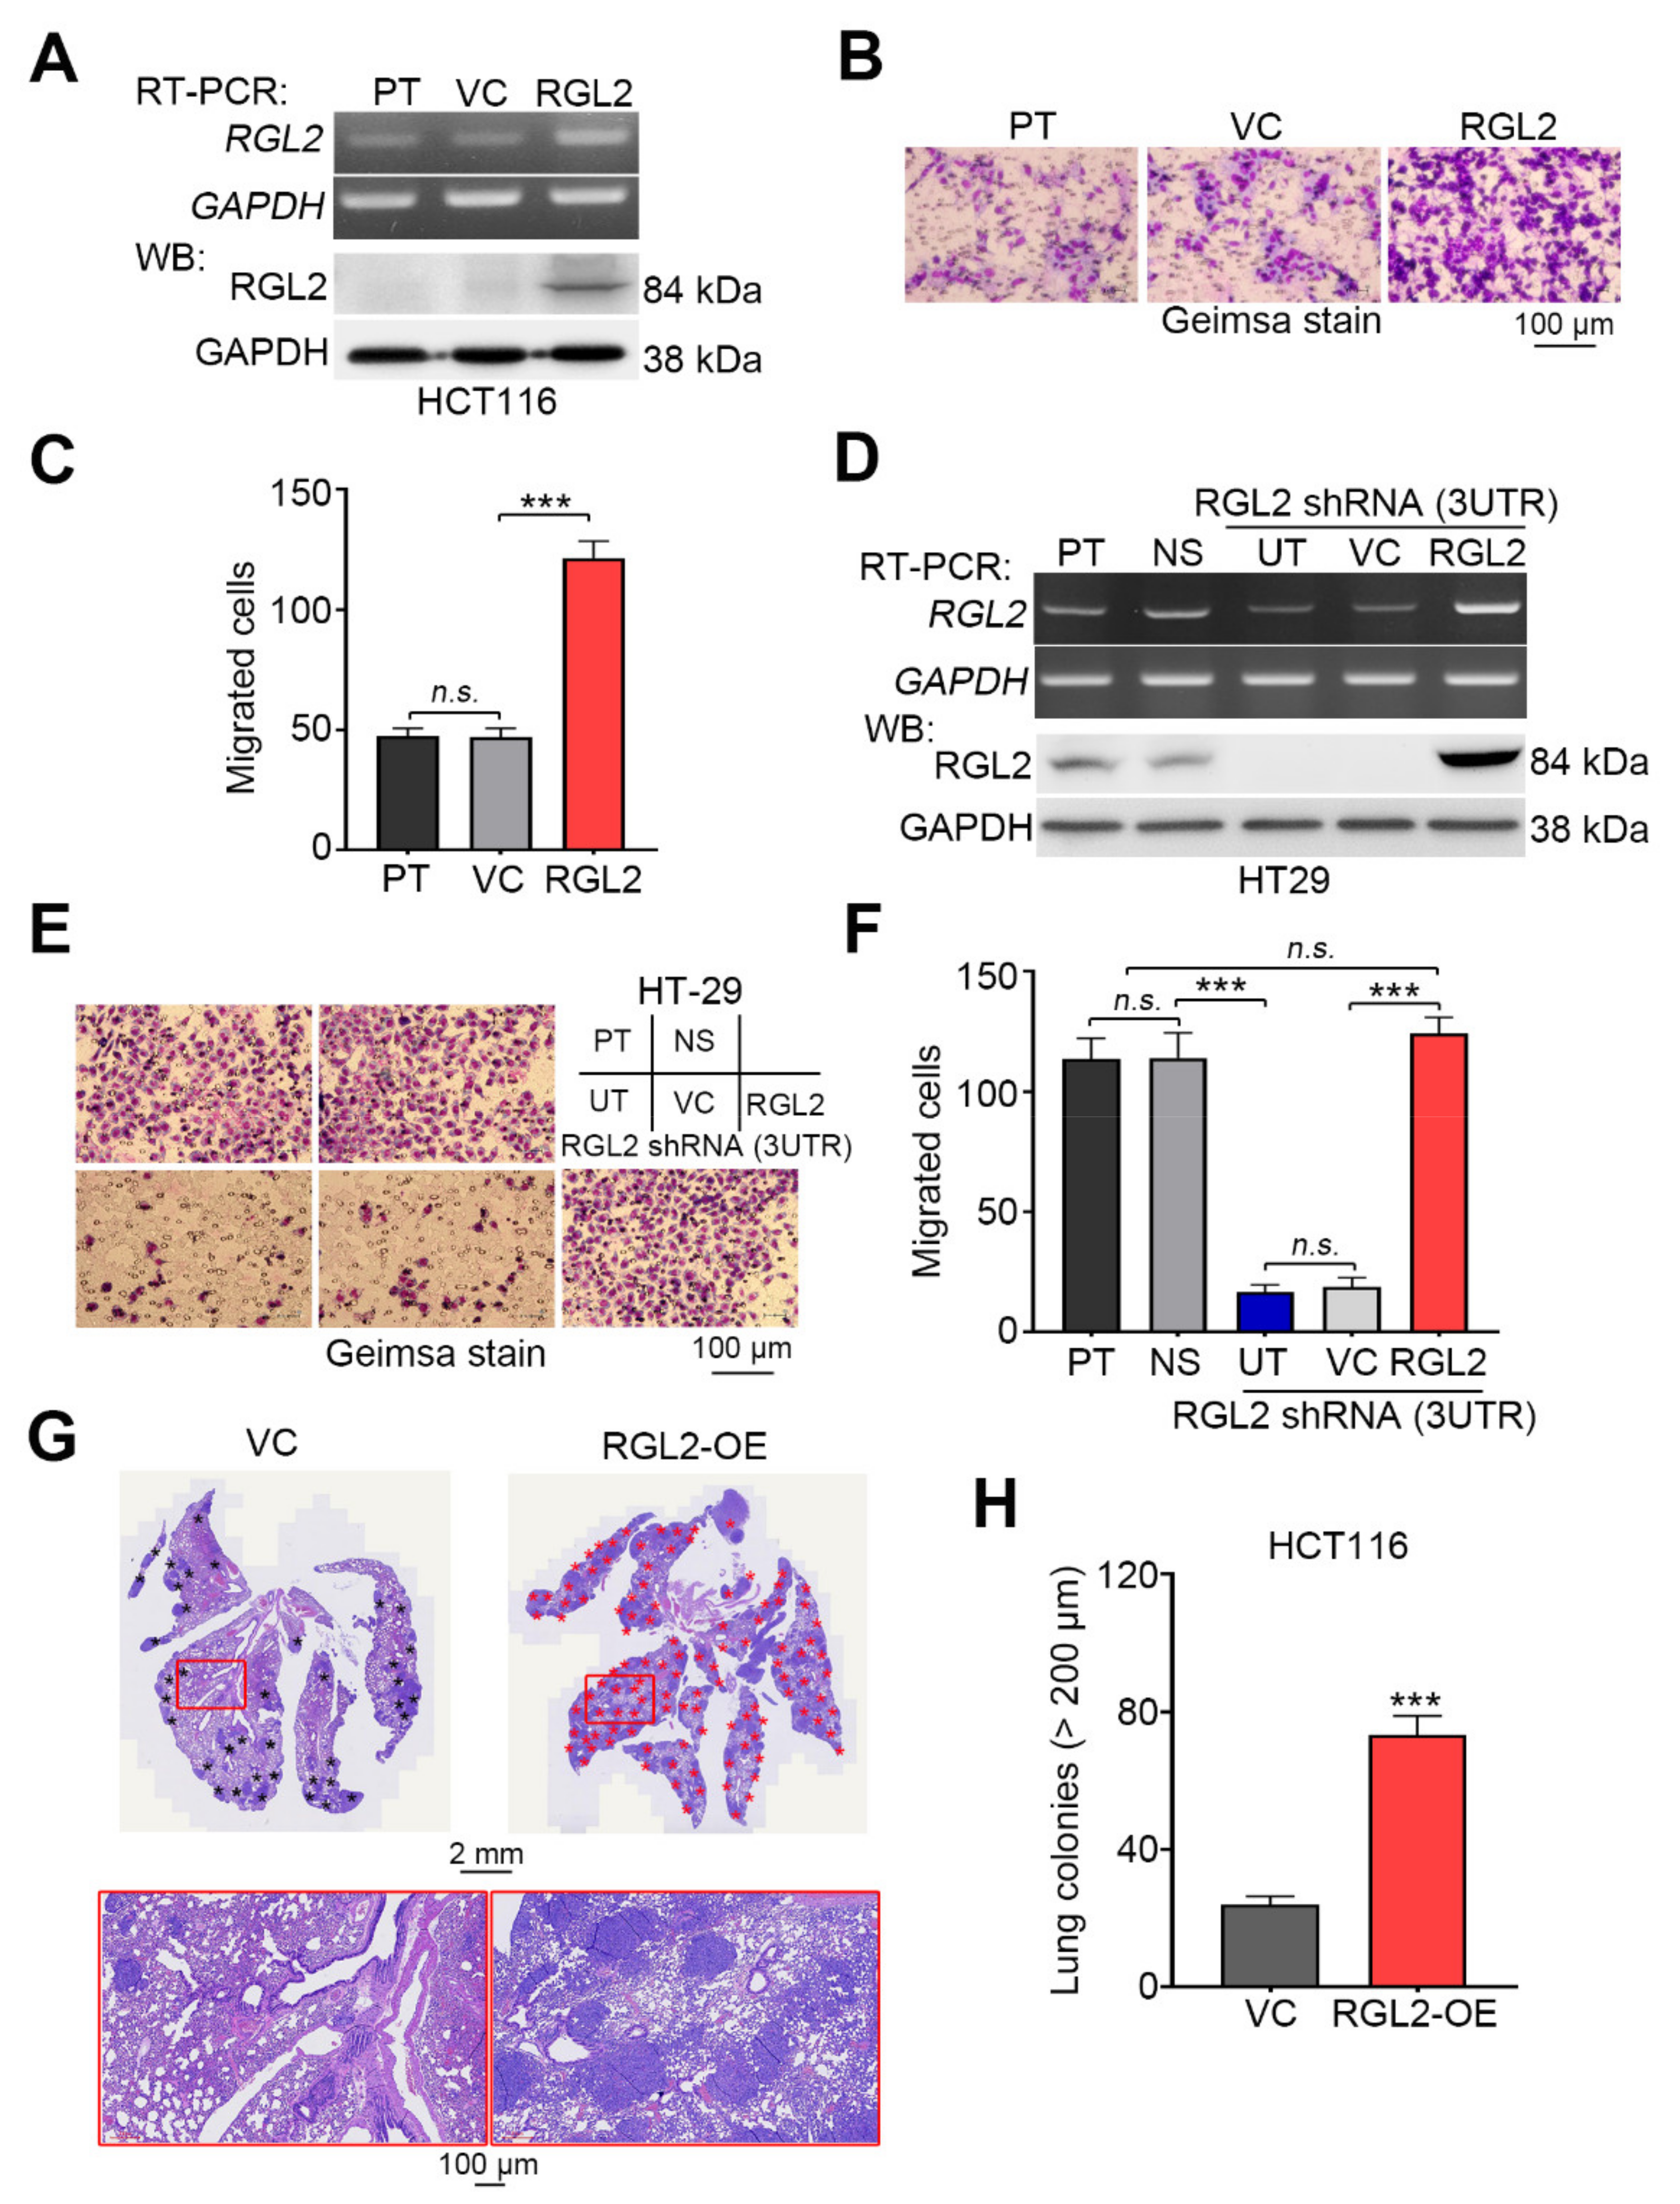 Cancers Free Full Text Rgl2 Drives The Metastatic Progression Of Colorectal Cancer Via Preventing The Protein Degradation Of B Catenin And Kras Html